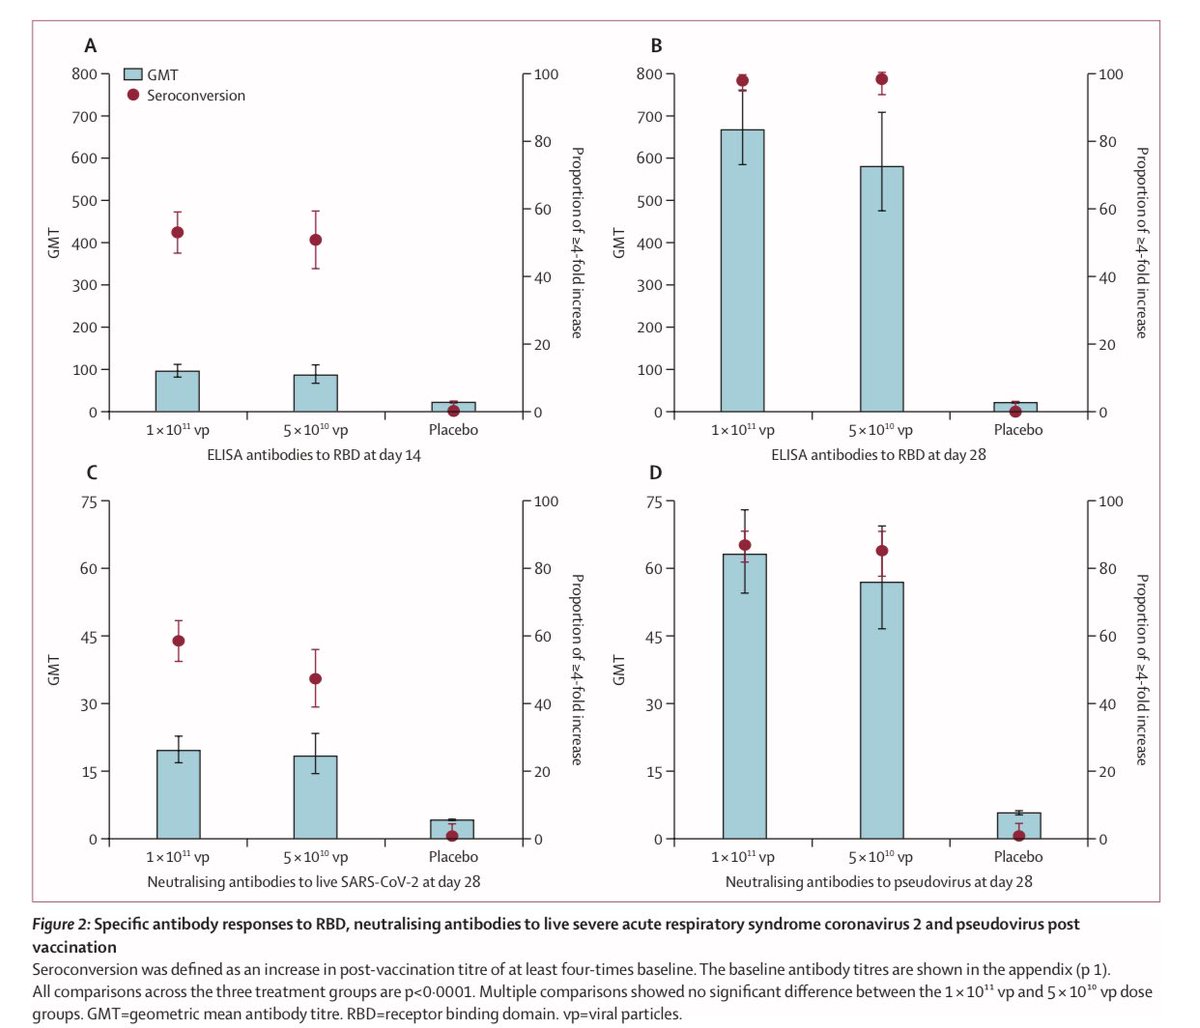 4) In the Wuhan trial, At both 14 and 28 days, both antibodies and neutralizing antibodies much higher than placebo. The half dose (middle dose, however you call it) was almost just as effective as the higher dose. T-cell response similar story.